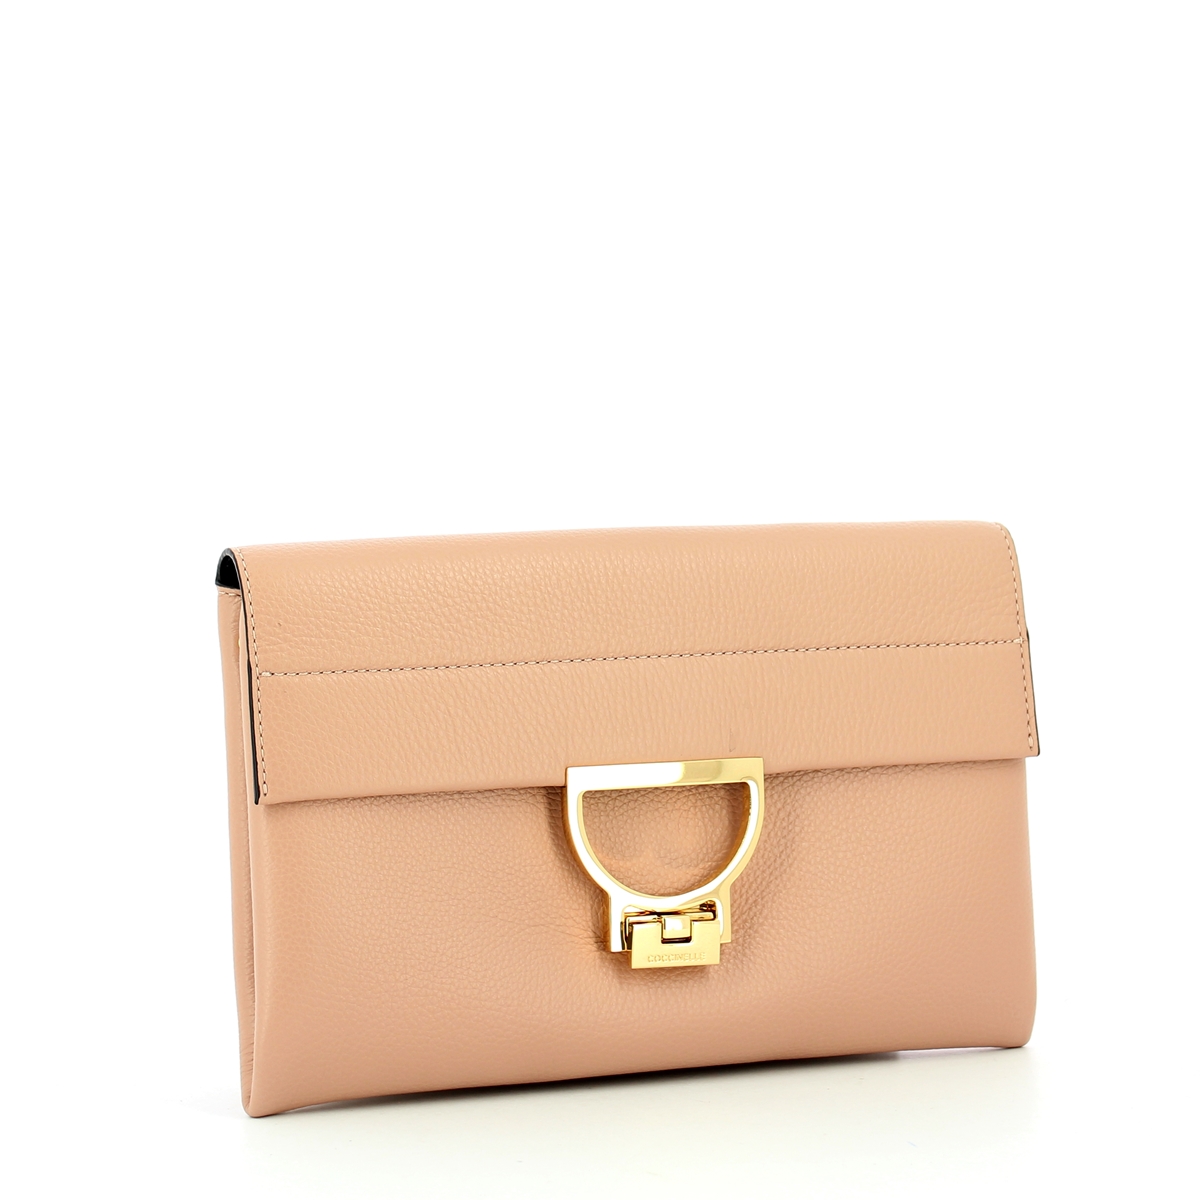 Arlettis Clutch in Natural Grain Leather Coccinelle | Bagalier.com